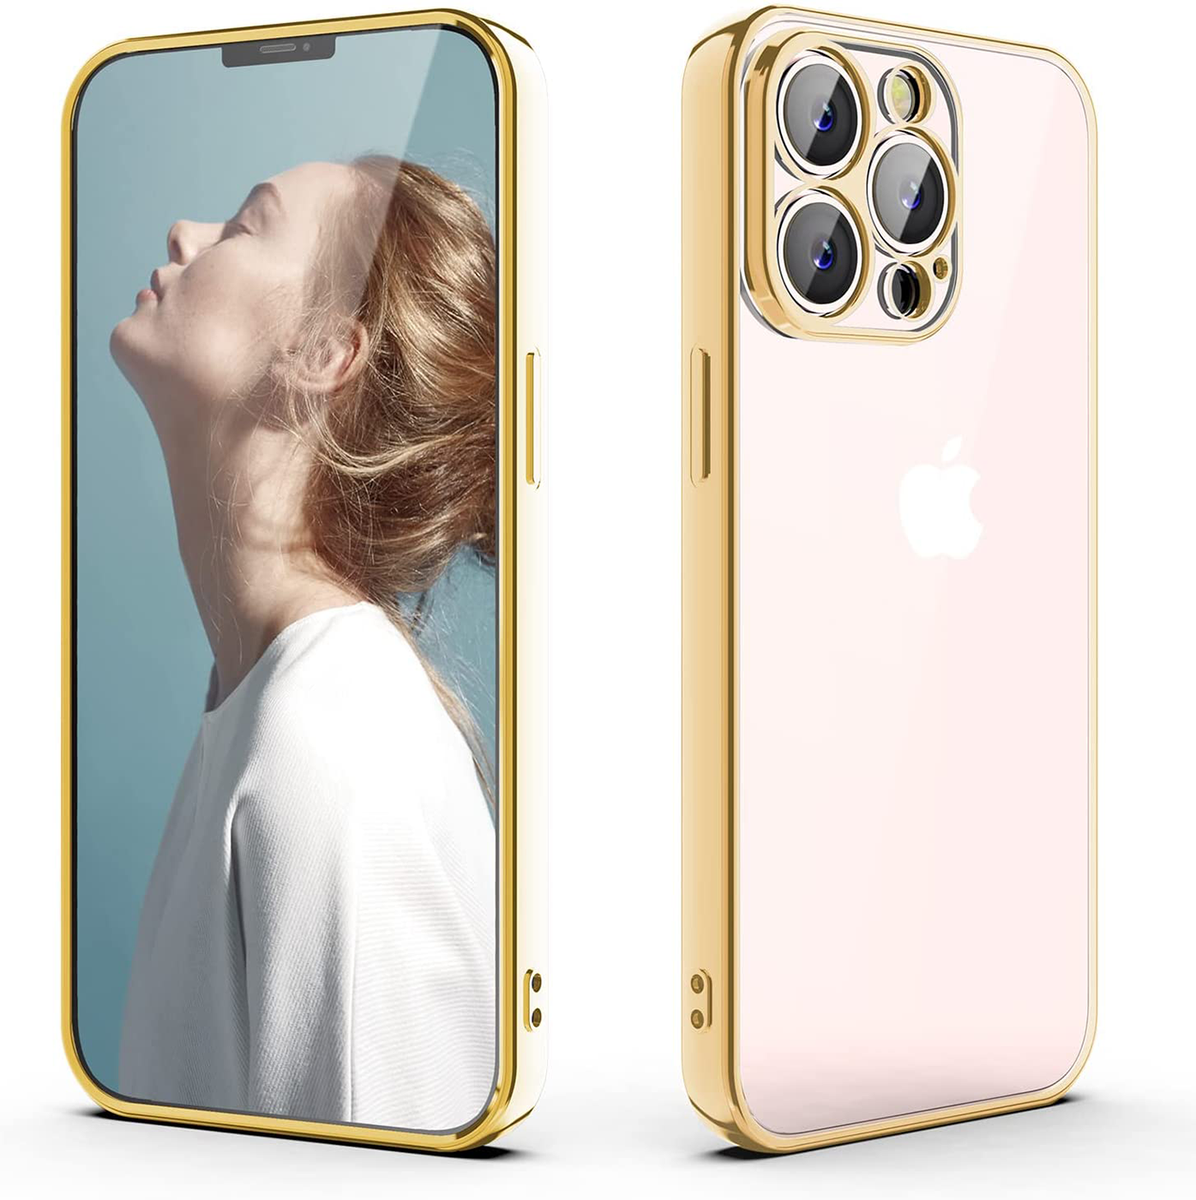 Side Colour Gold Case For Iphone 12 Pro Max 12 Pro 12 Buy Online In South Africa Takealot Com